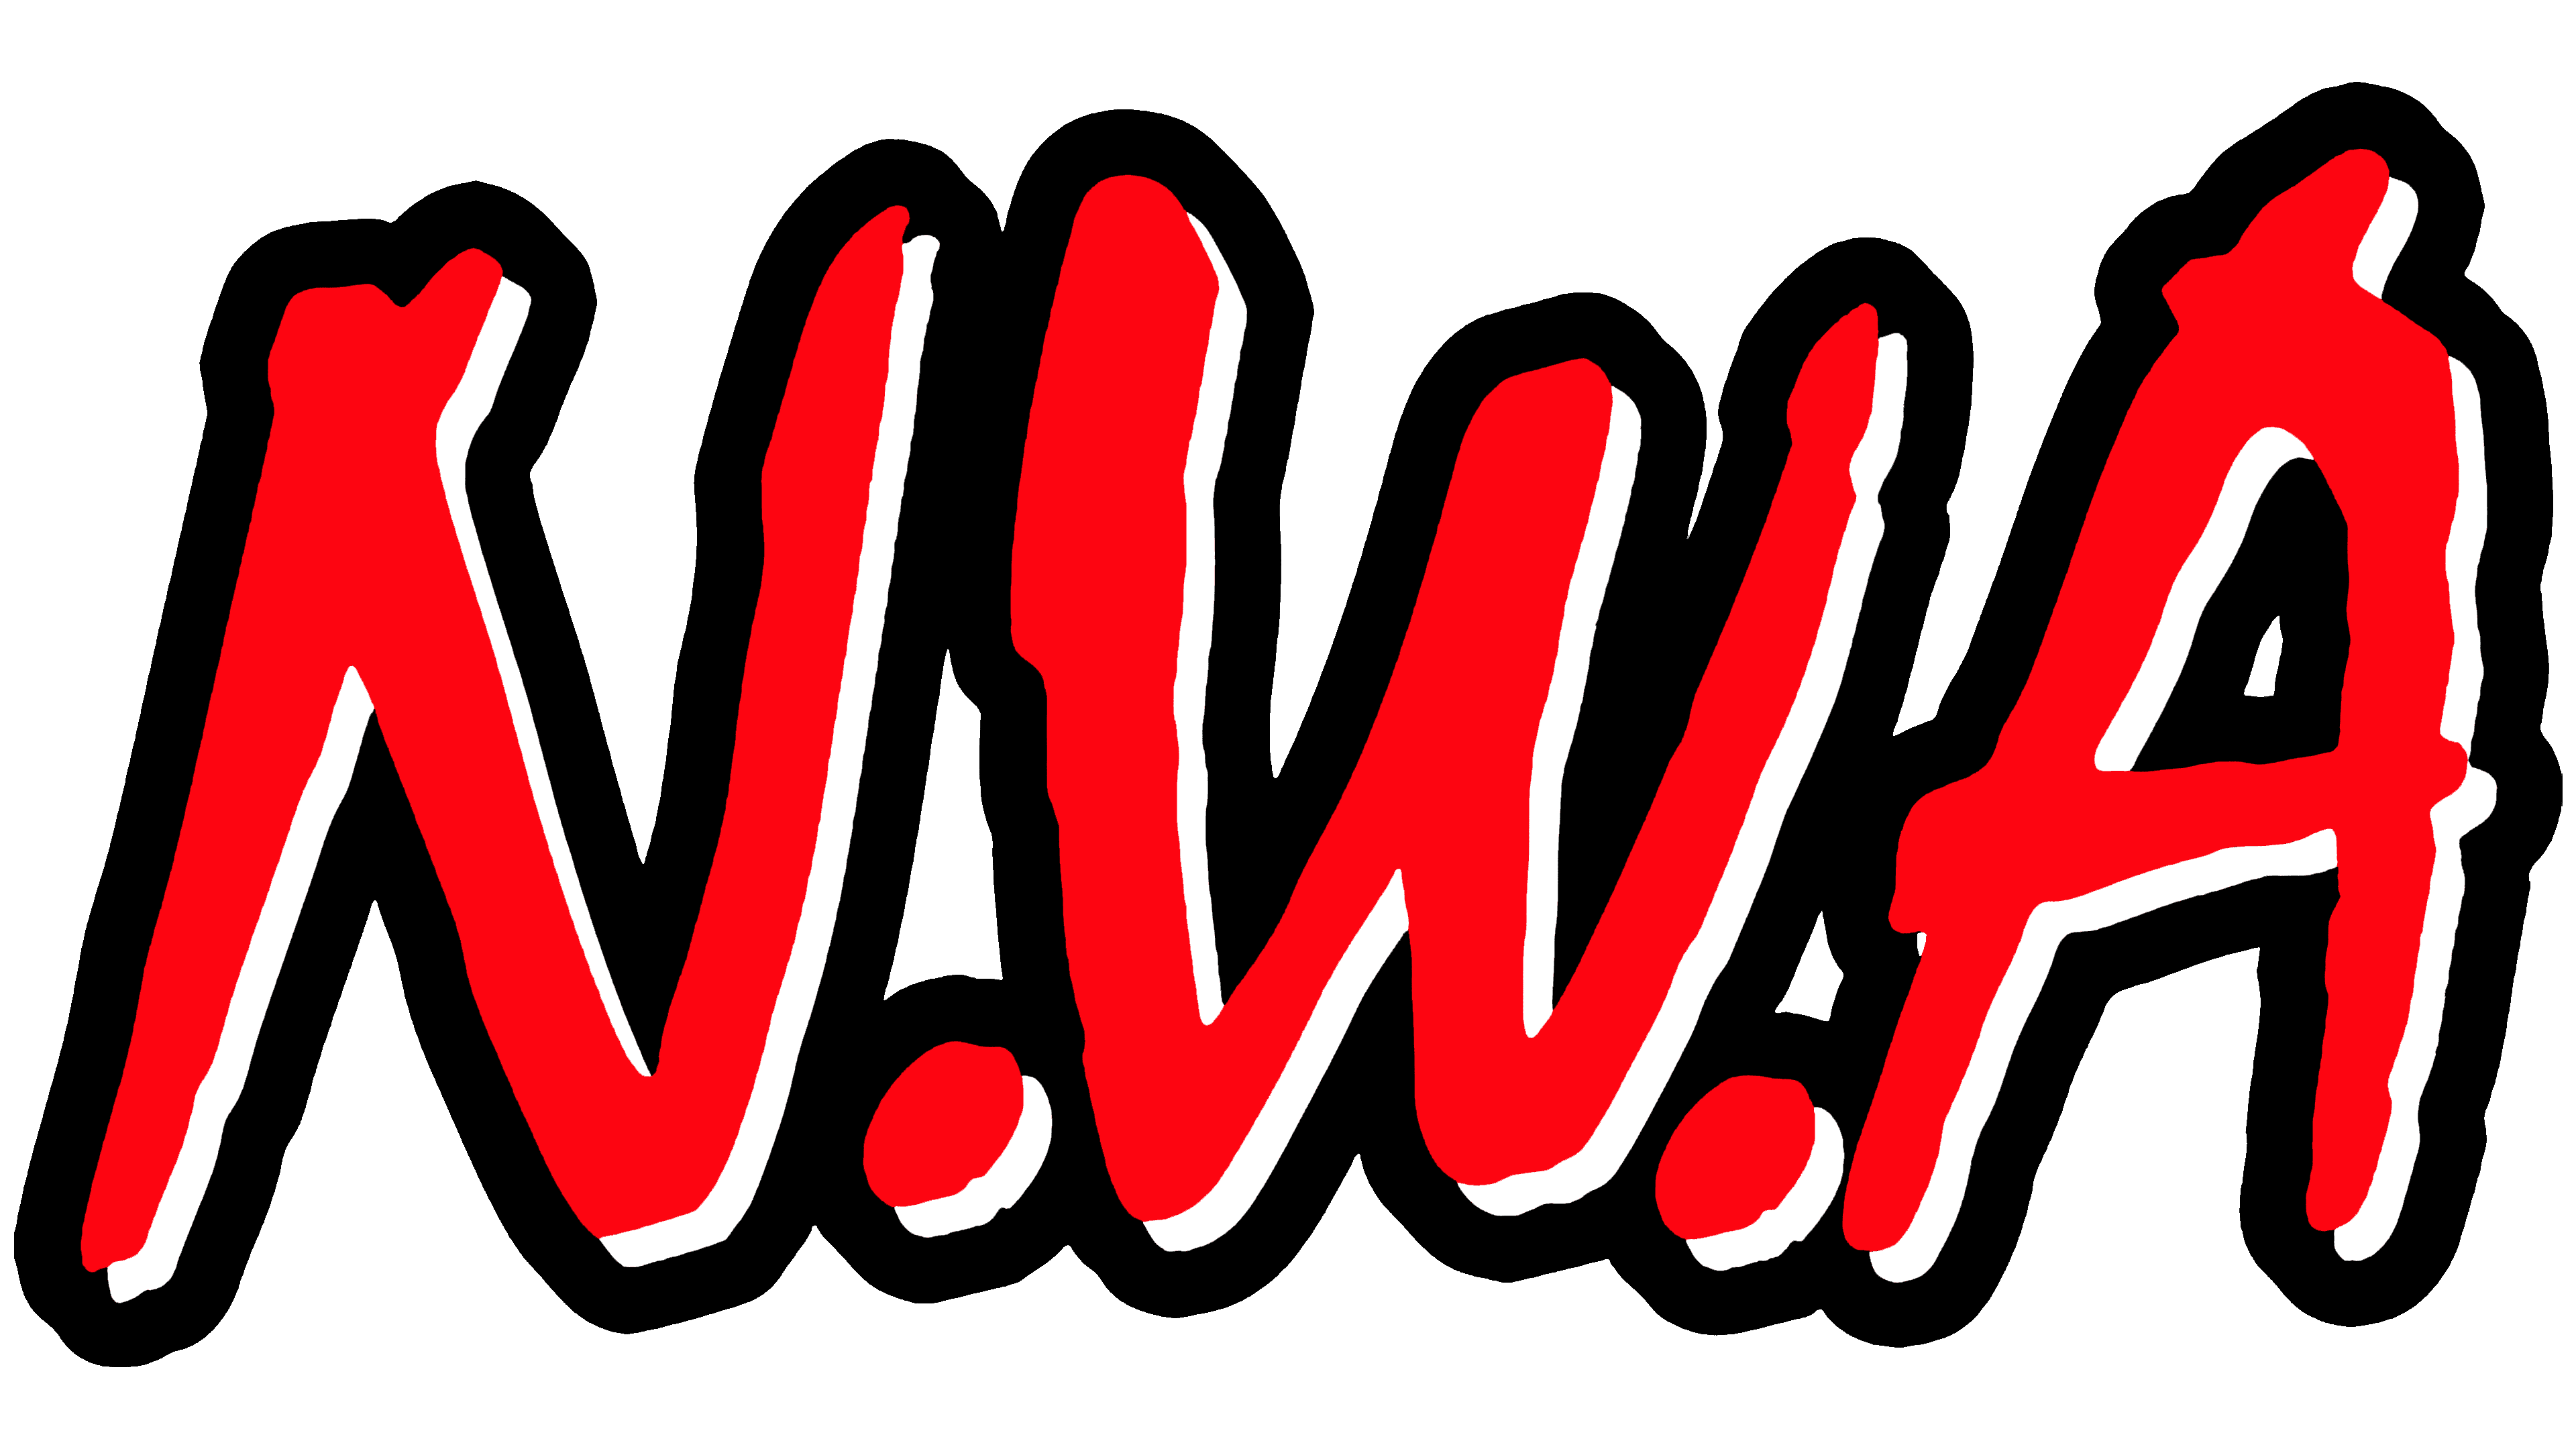 NWA Logo, symbol, meaning, history, PNG, brand